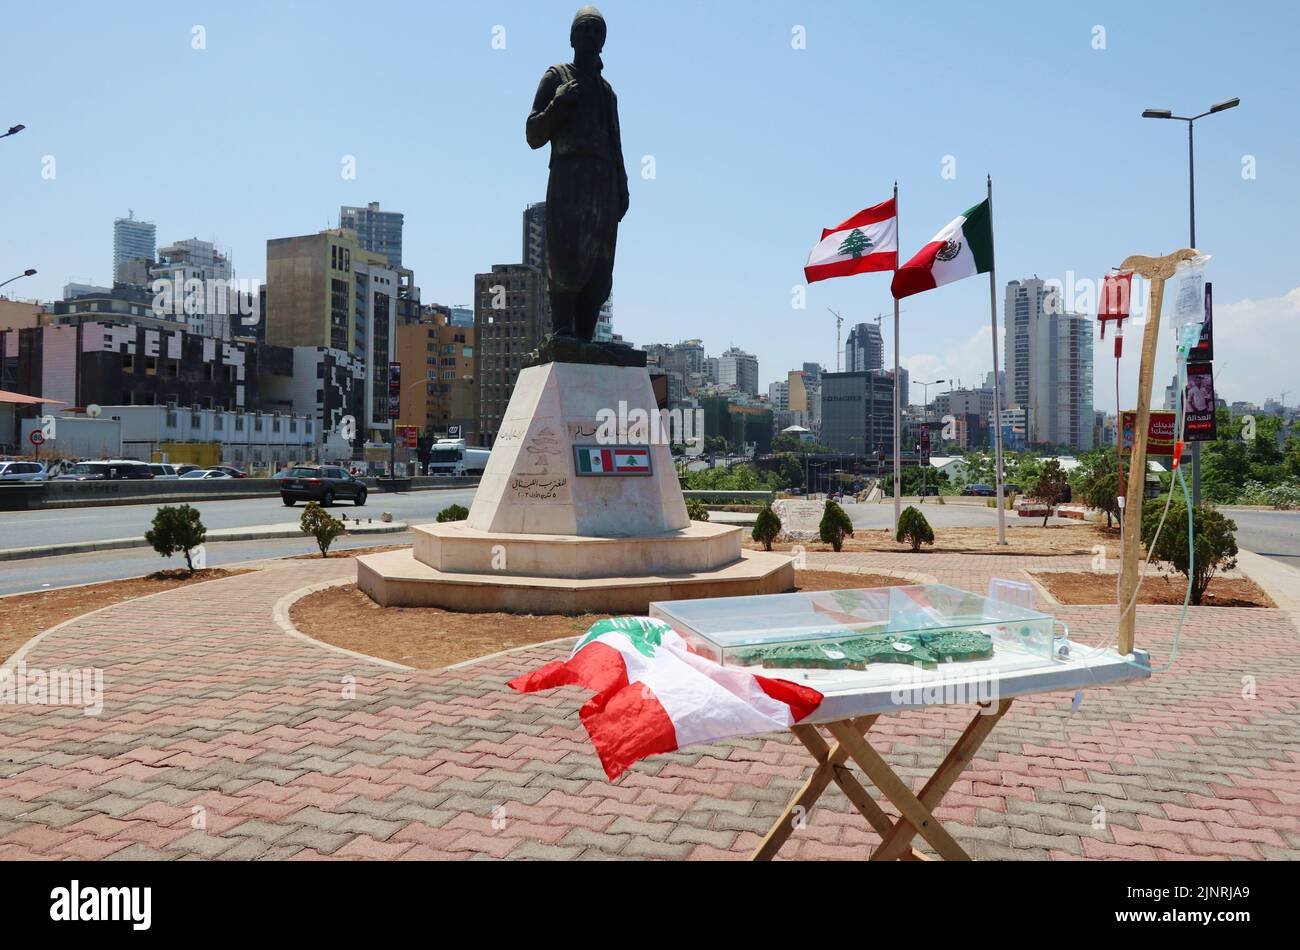 Installation set by activists at the port to mark the second anniversary of explosion, Beirut, Lebanon, August 10 2022.  (Photo by Elisa Gestri/Sipa USA). Stock Photo